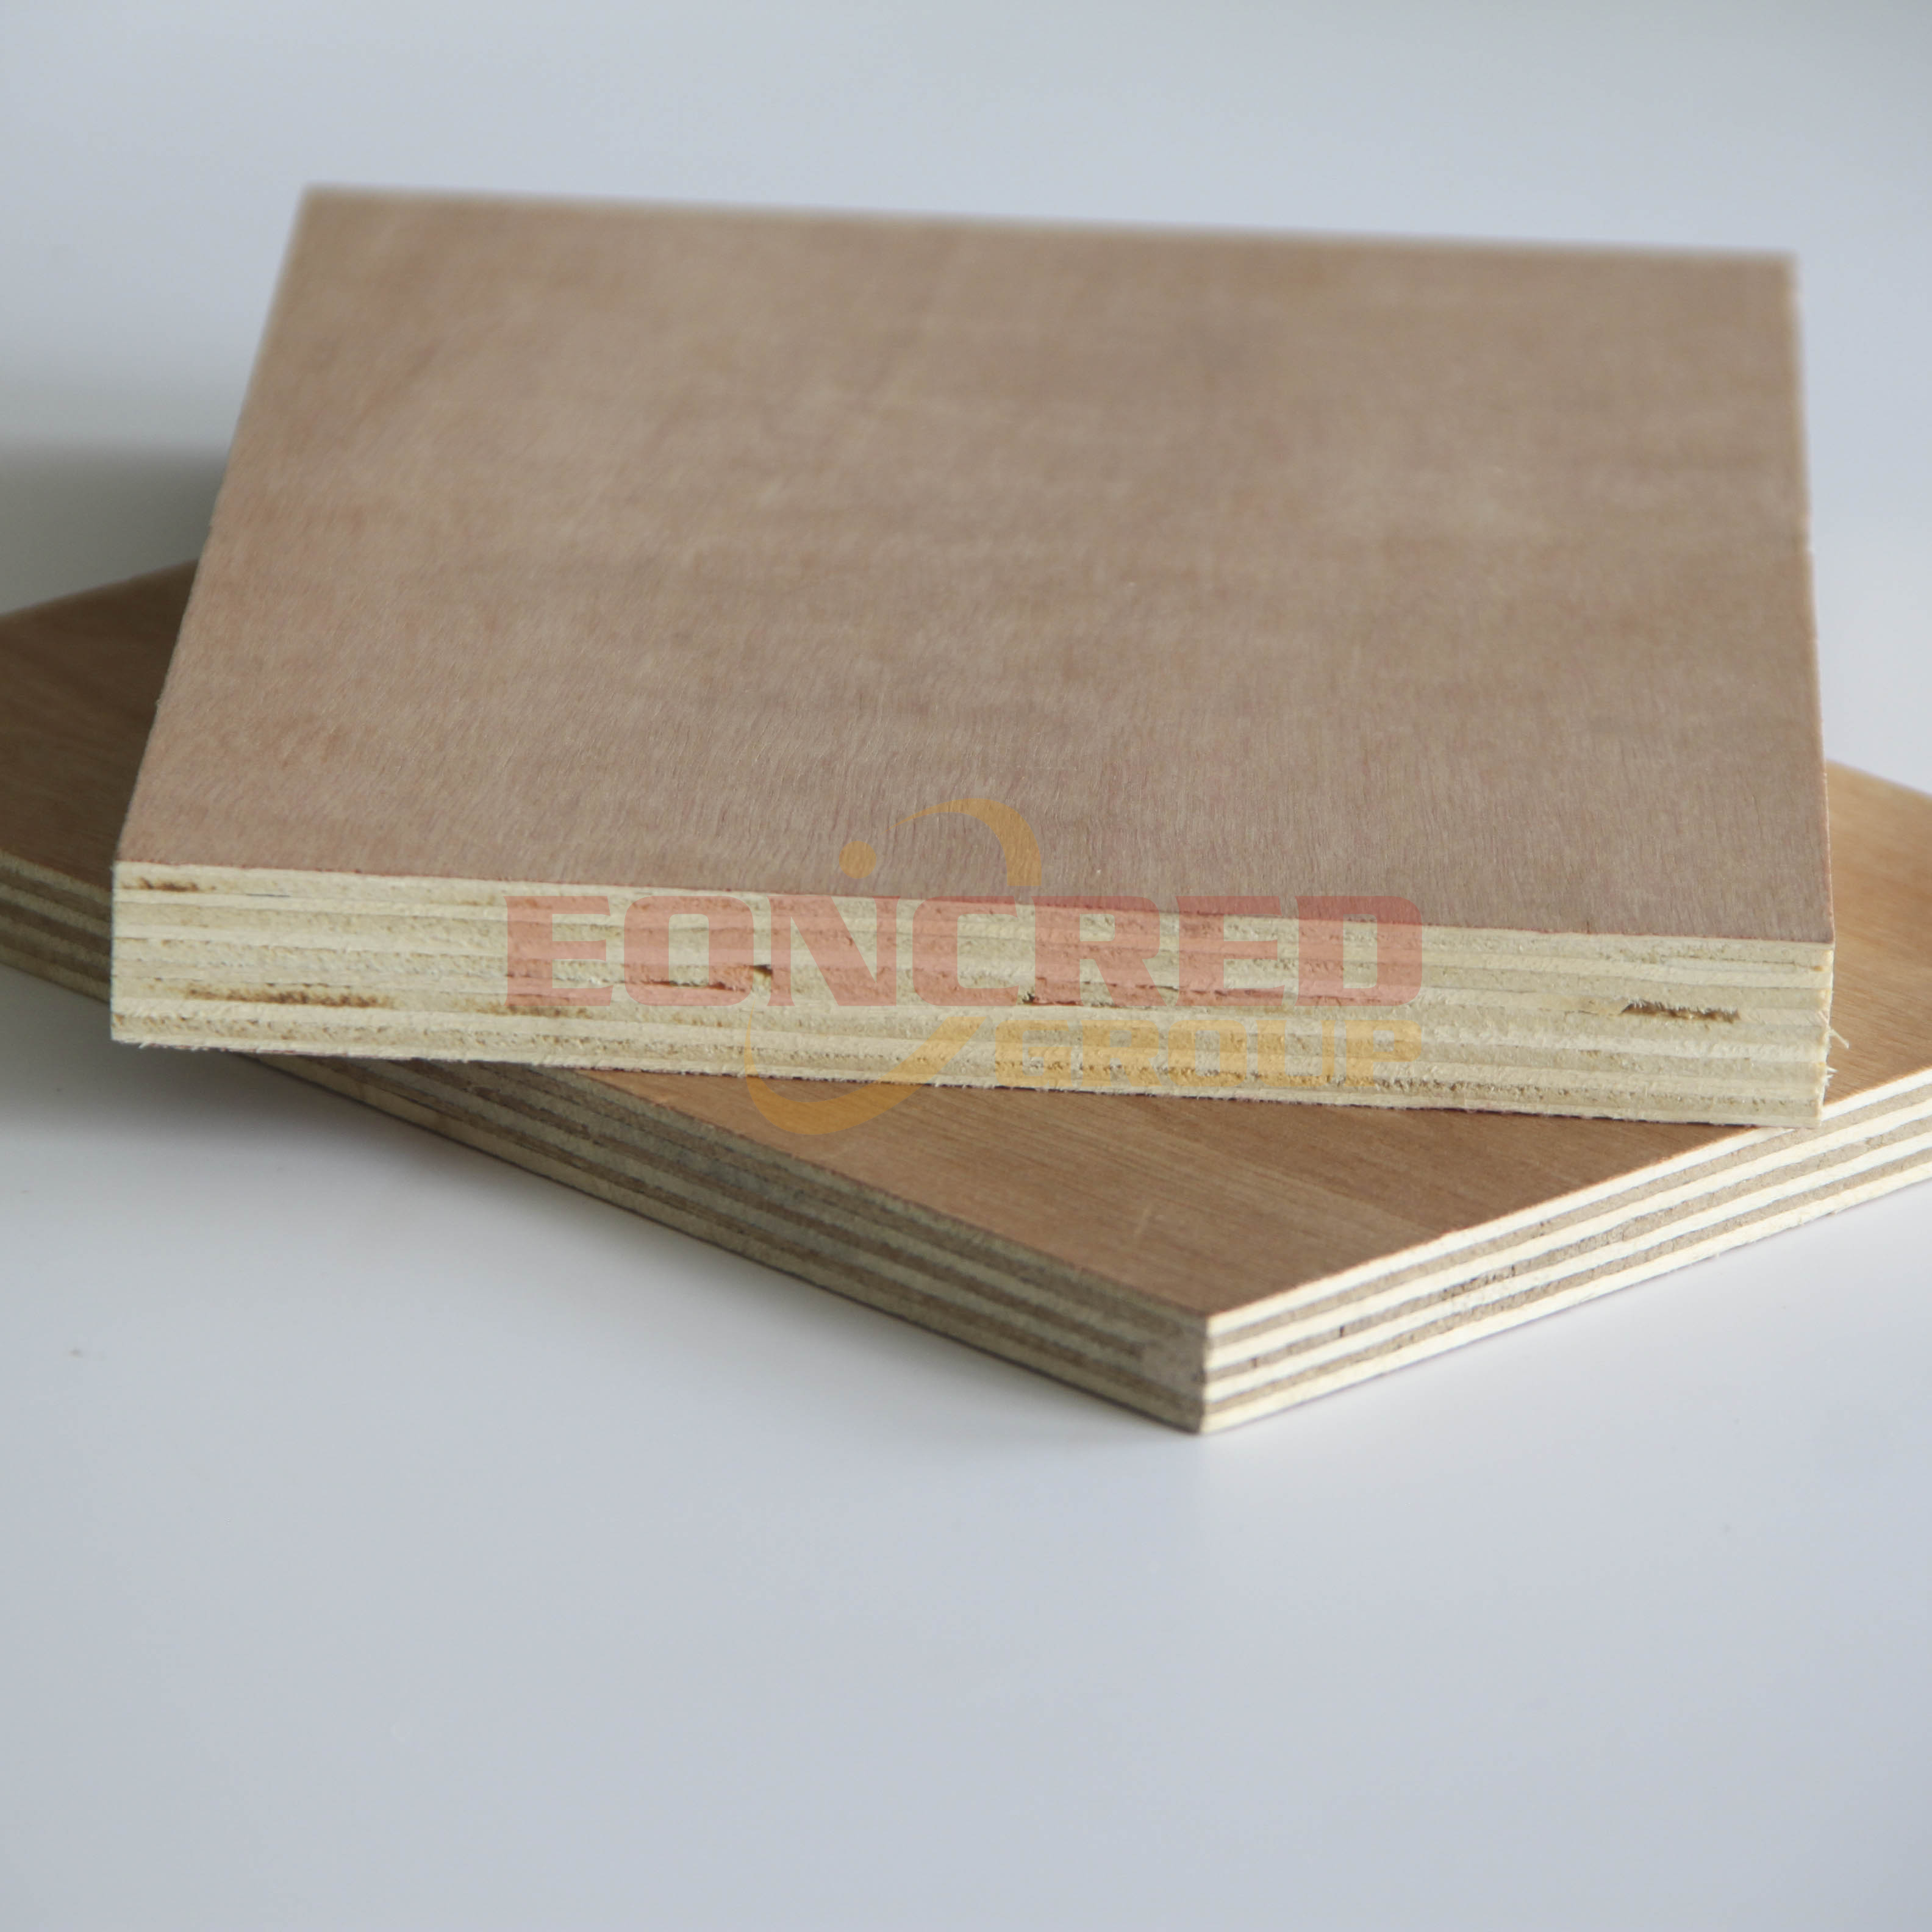 18mm Black Poplar Core Film Faced Construction Plywood / Finger-Jointed Core Shuttering Plywood